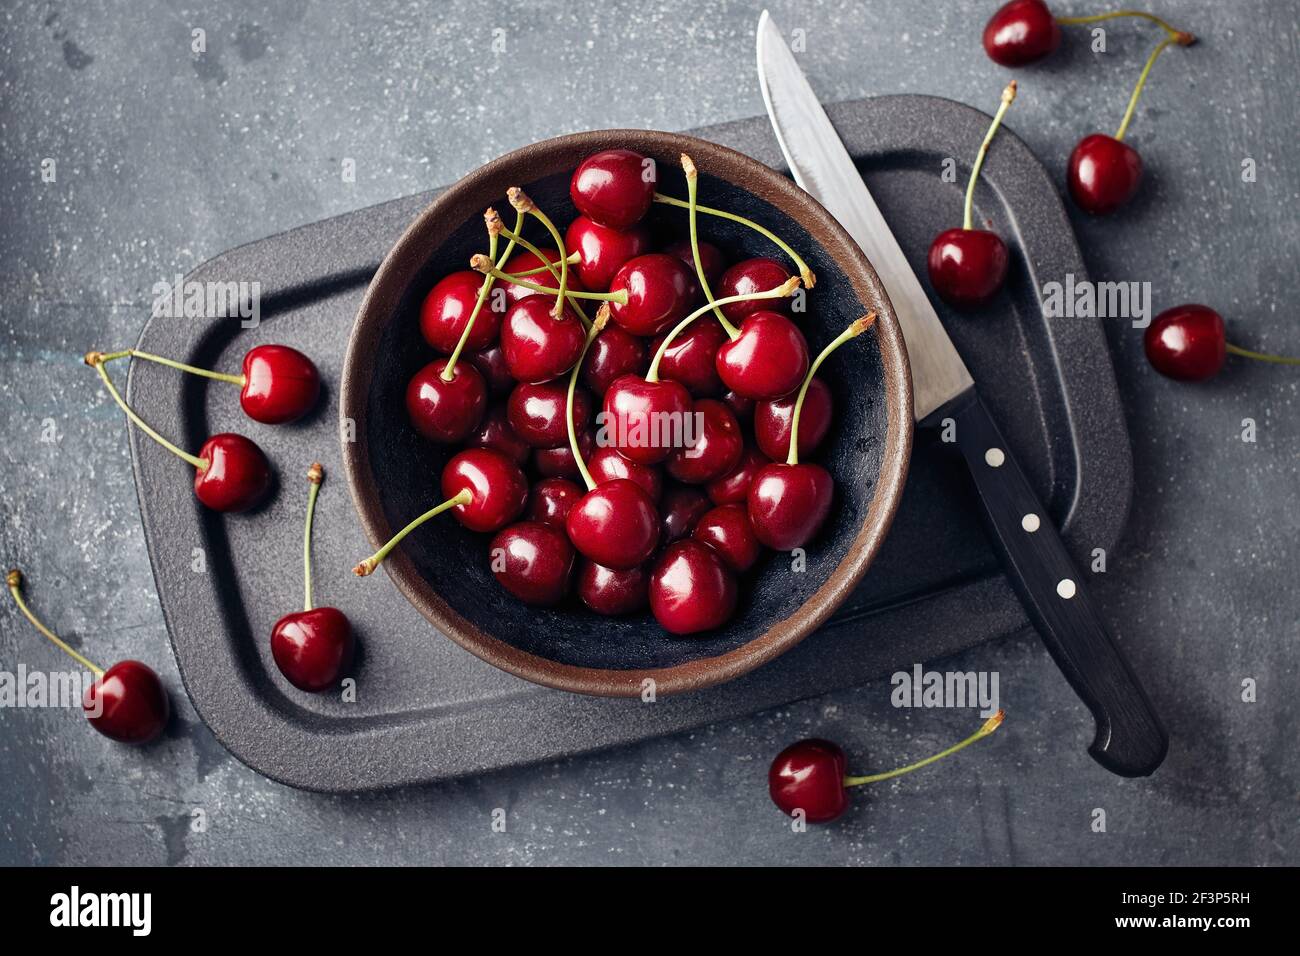 Cherries in a small bowl and scattered around the table. Stock Photo